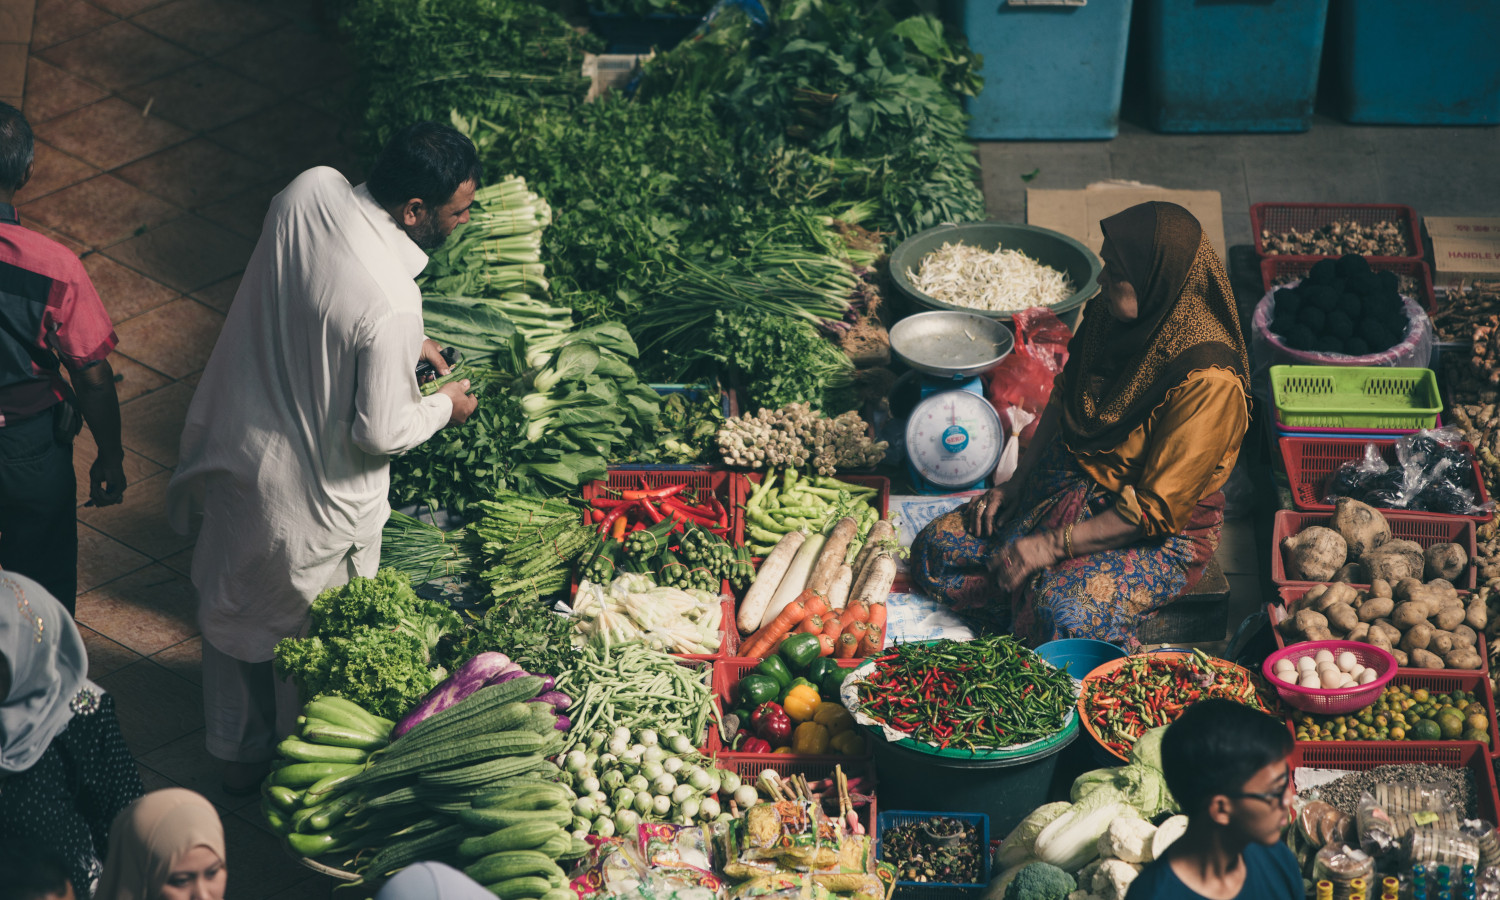 The First World Farmers Markets Report analyzes the tools global farmers markets need to successfully create alternatives to the globalized agrifood system.